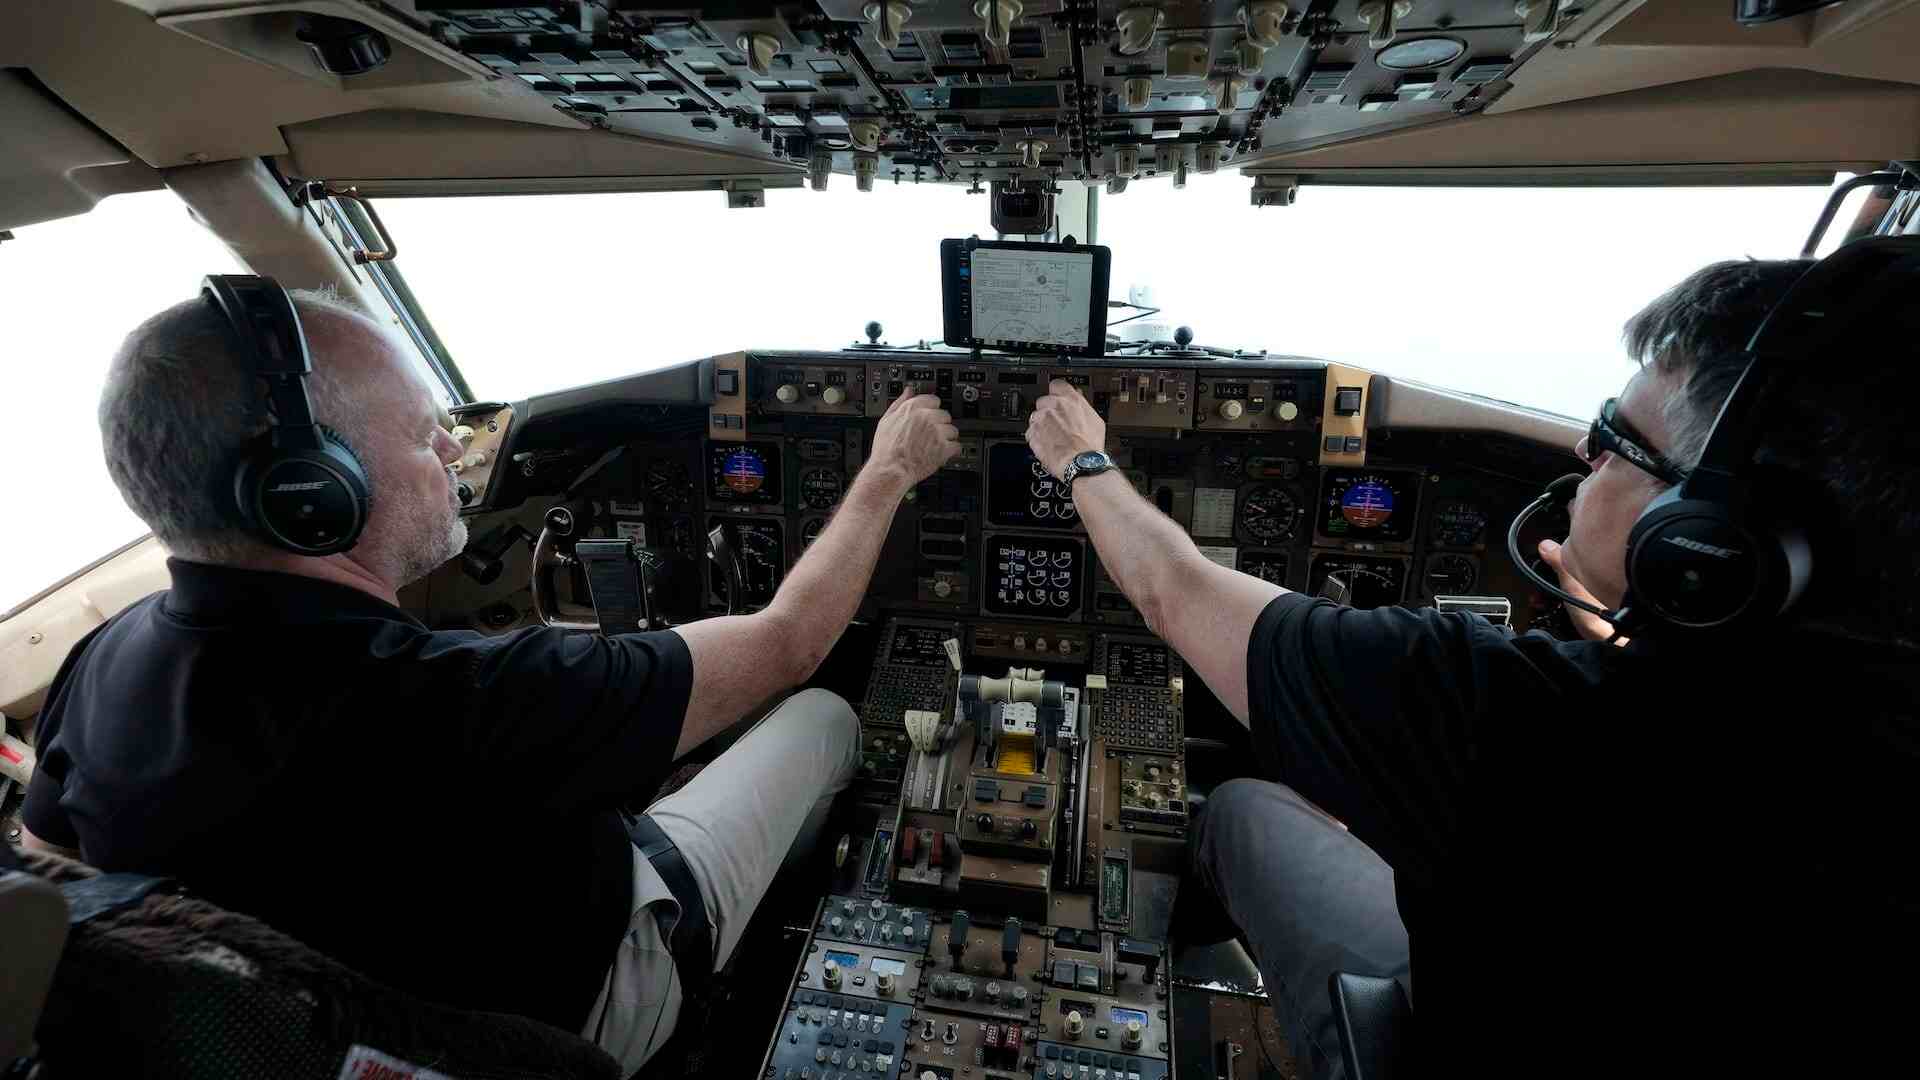 This cockpit-alert system could be a safety ‘game-changer’ for airport runways